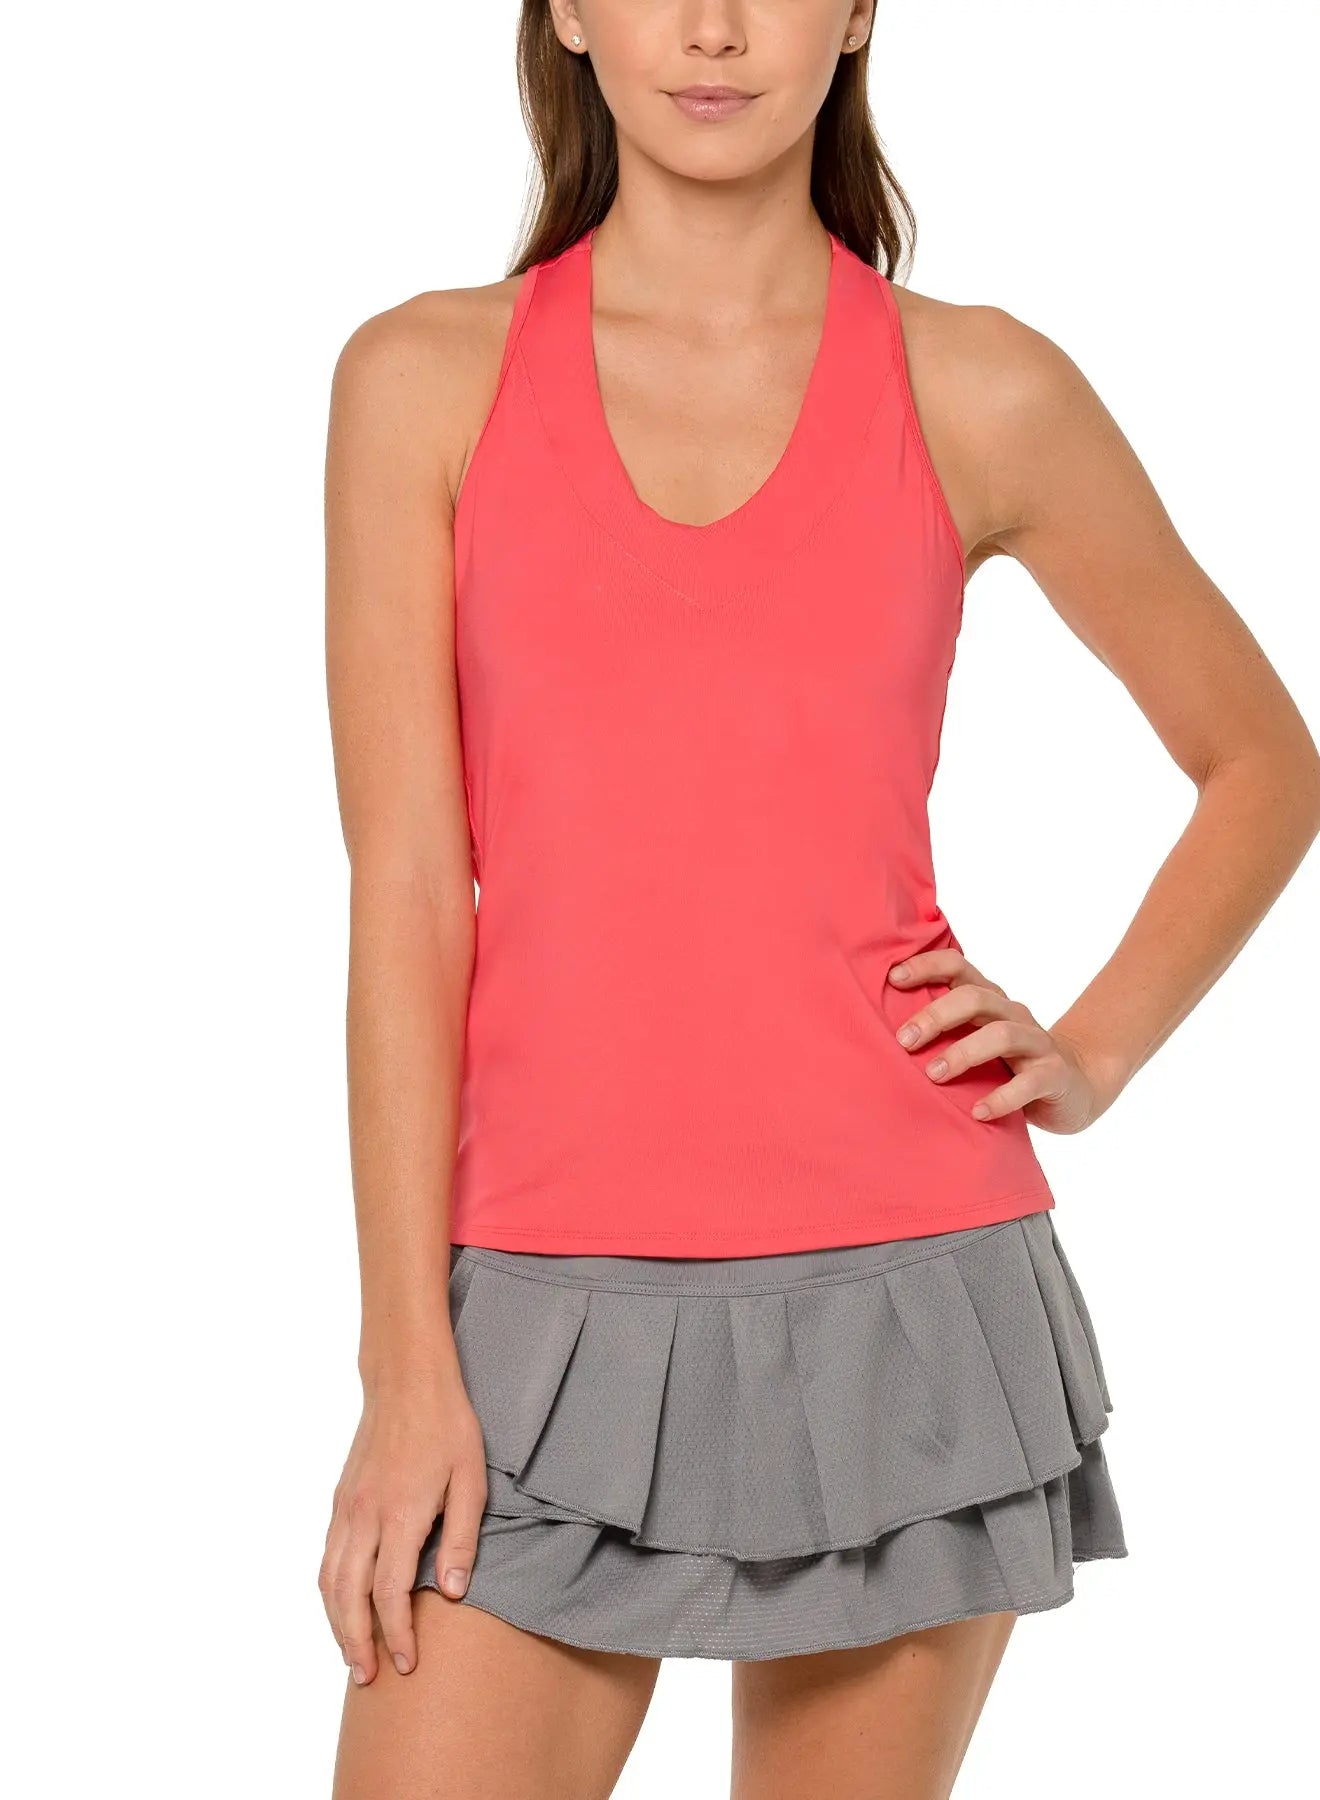 Shop Lucky IN Love v-neck tank w/ Bra- Runway Athletics. V-neck, racerback tank with a built-in bra and side mesh inserts.